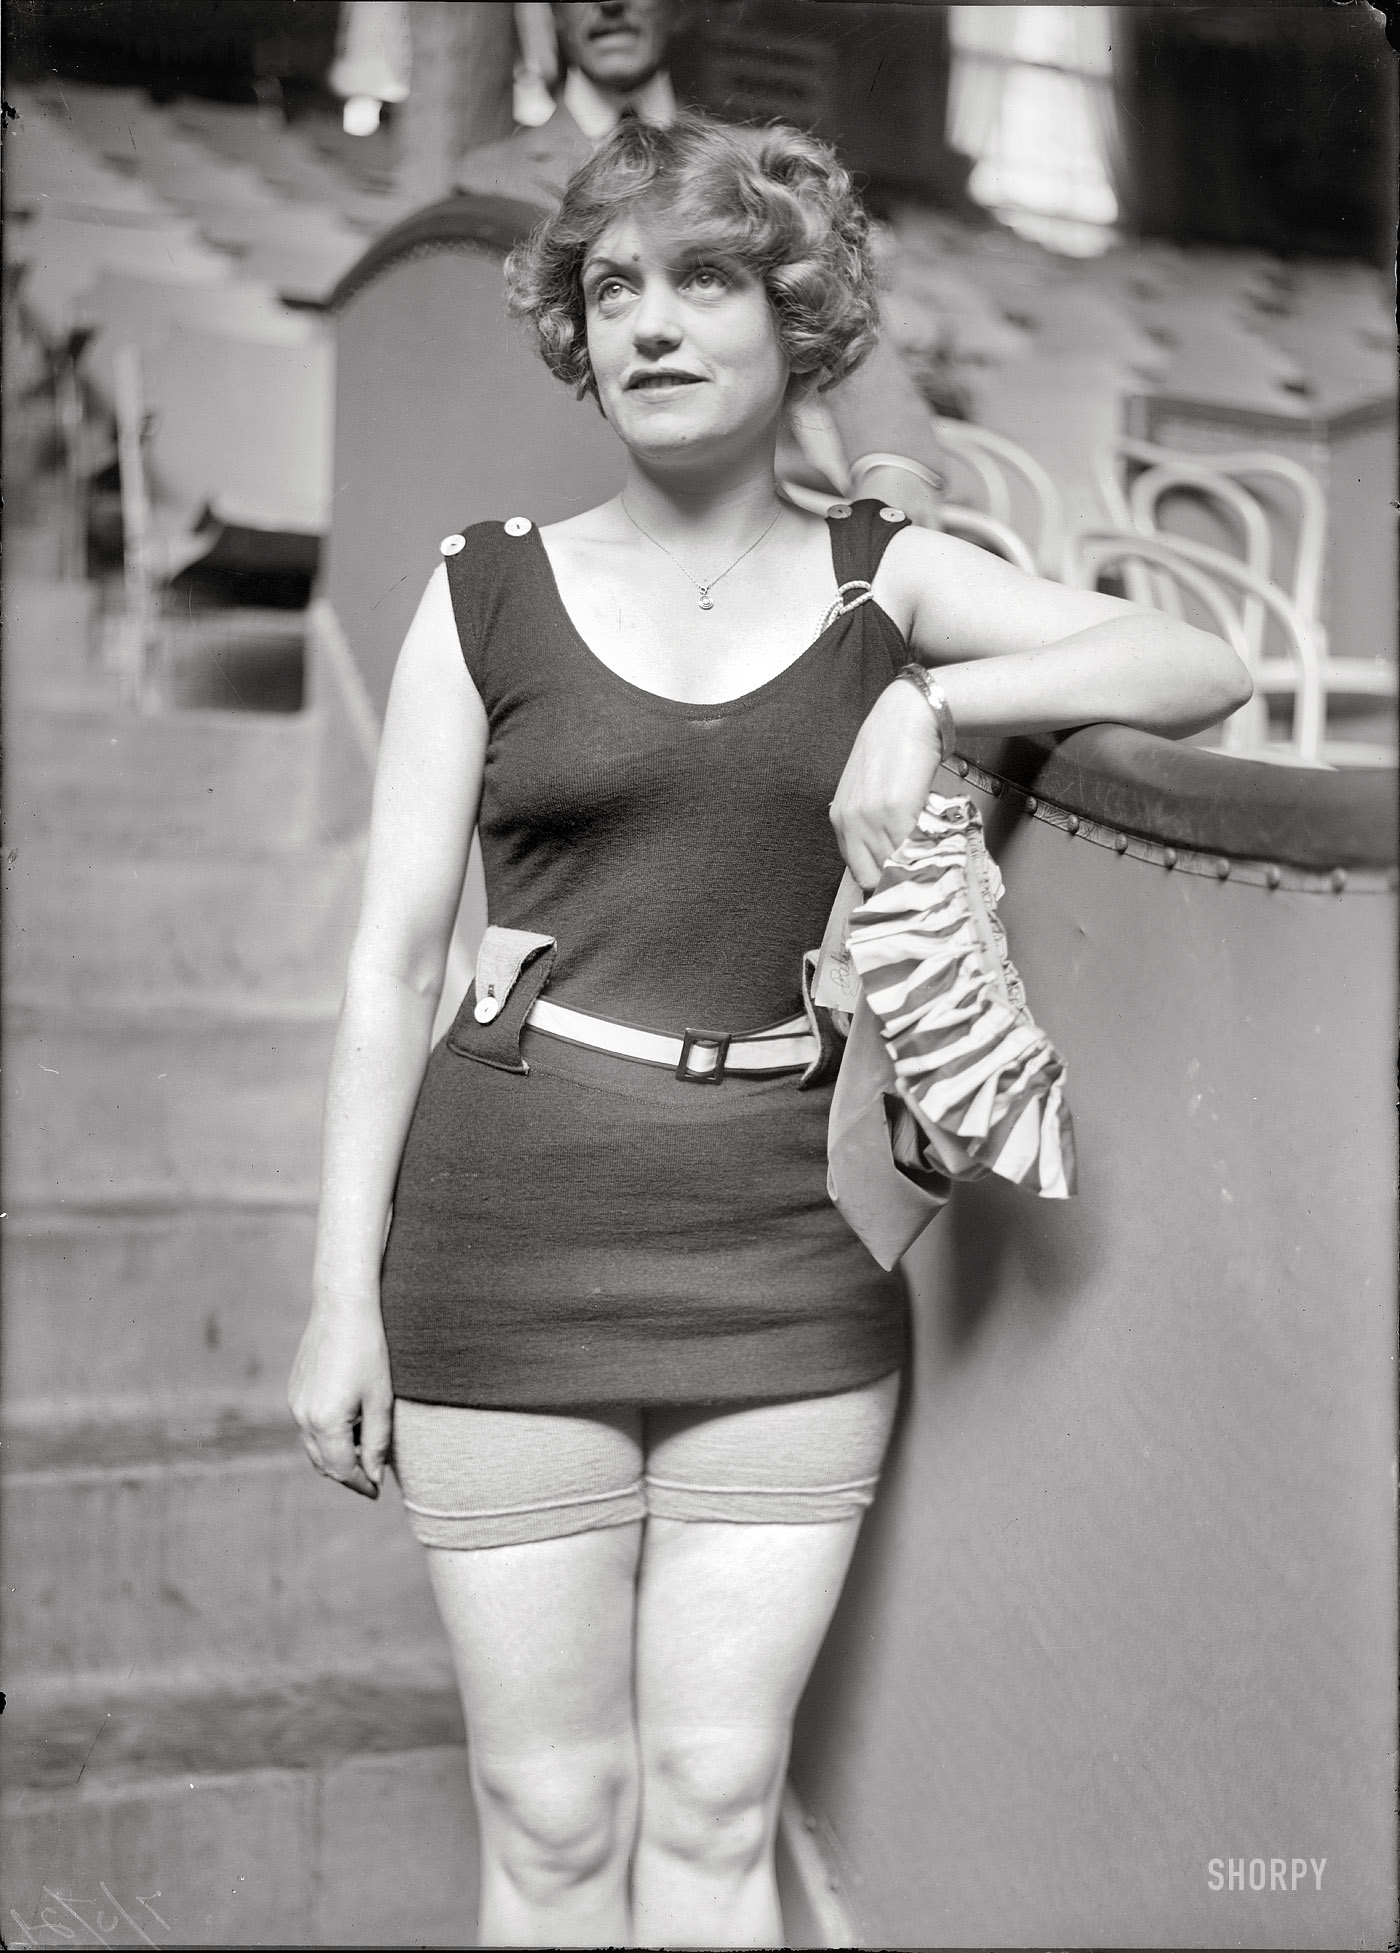 New York, July 5, 1921. "Joan Broadhurst." One of the players in "The Broadway Whirl," a musical comedy revue at the Times Square Theatre. View full size.